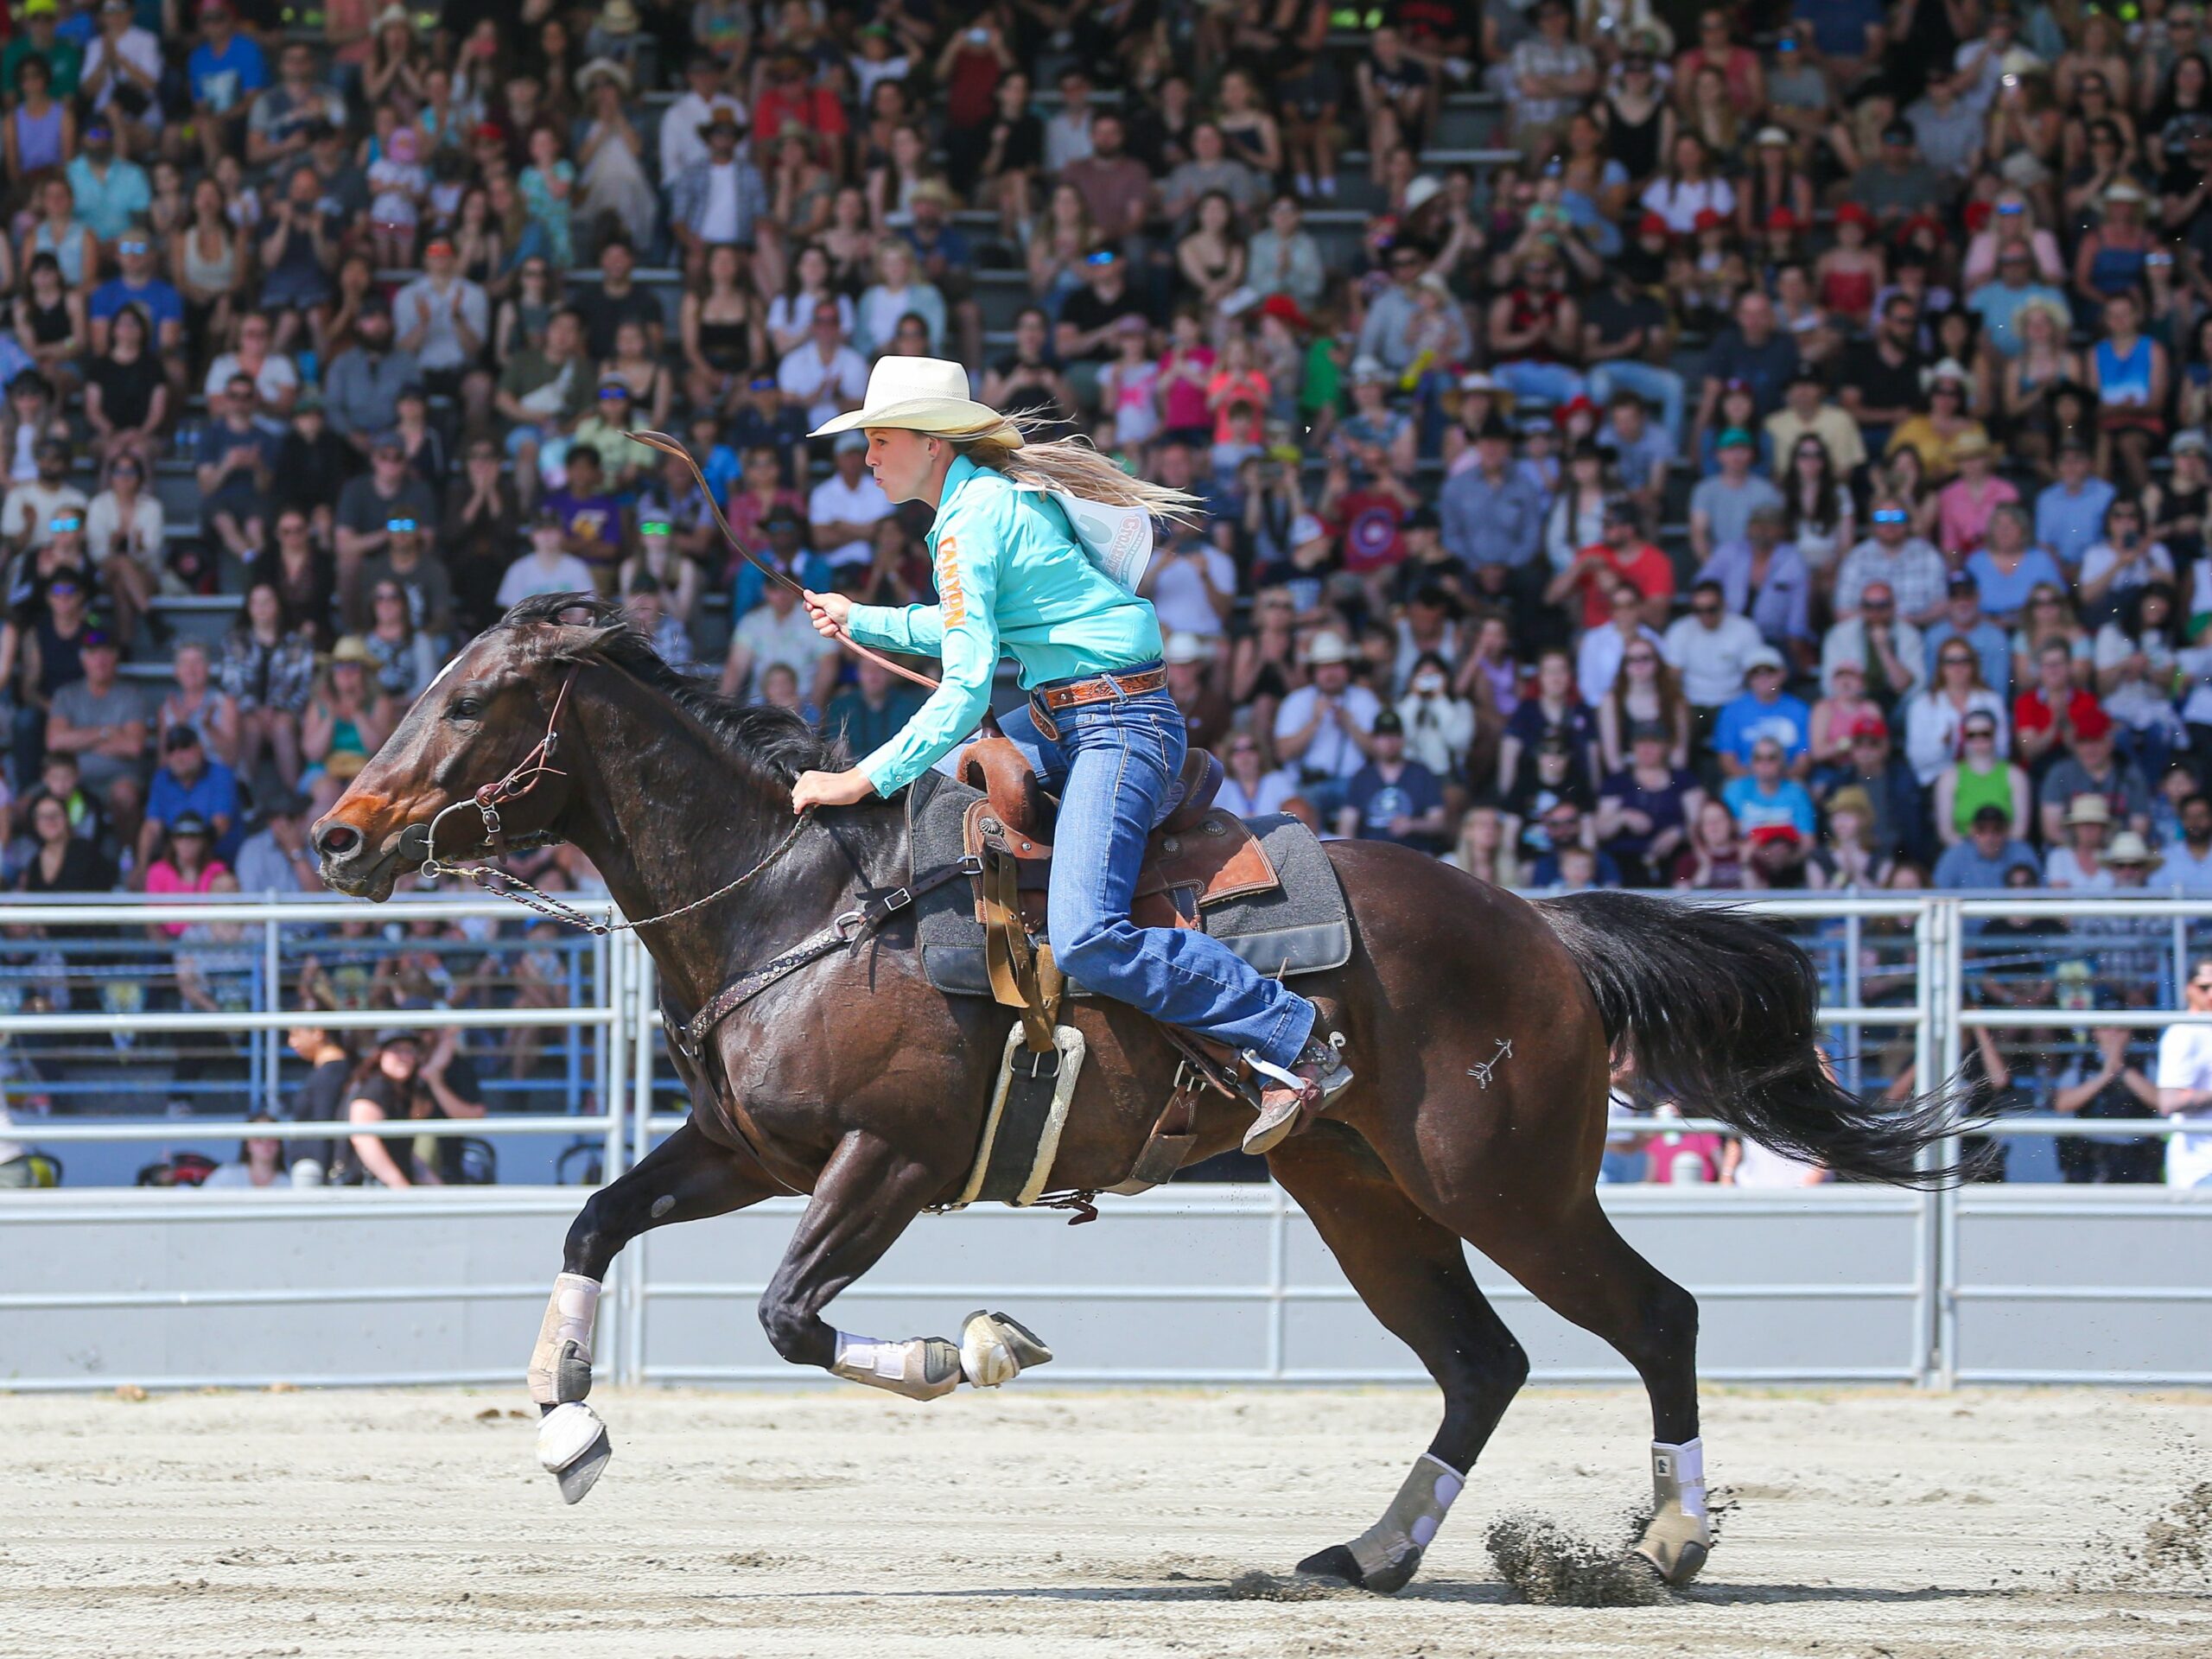 Barrel Racer in Full Gallop at the Cloverdale Rodeo and Country Fair